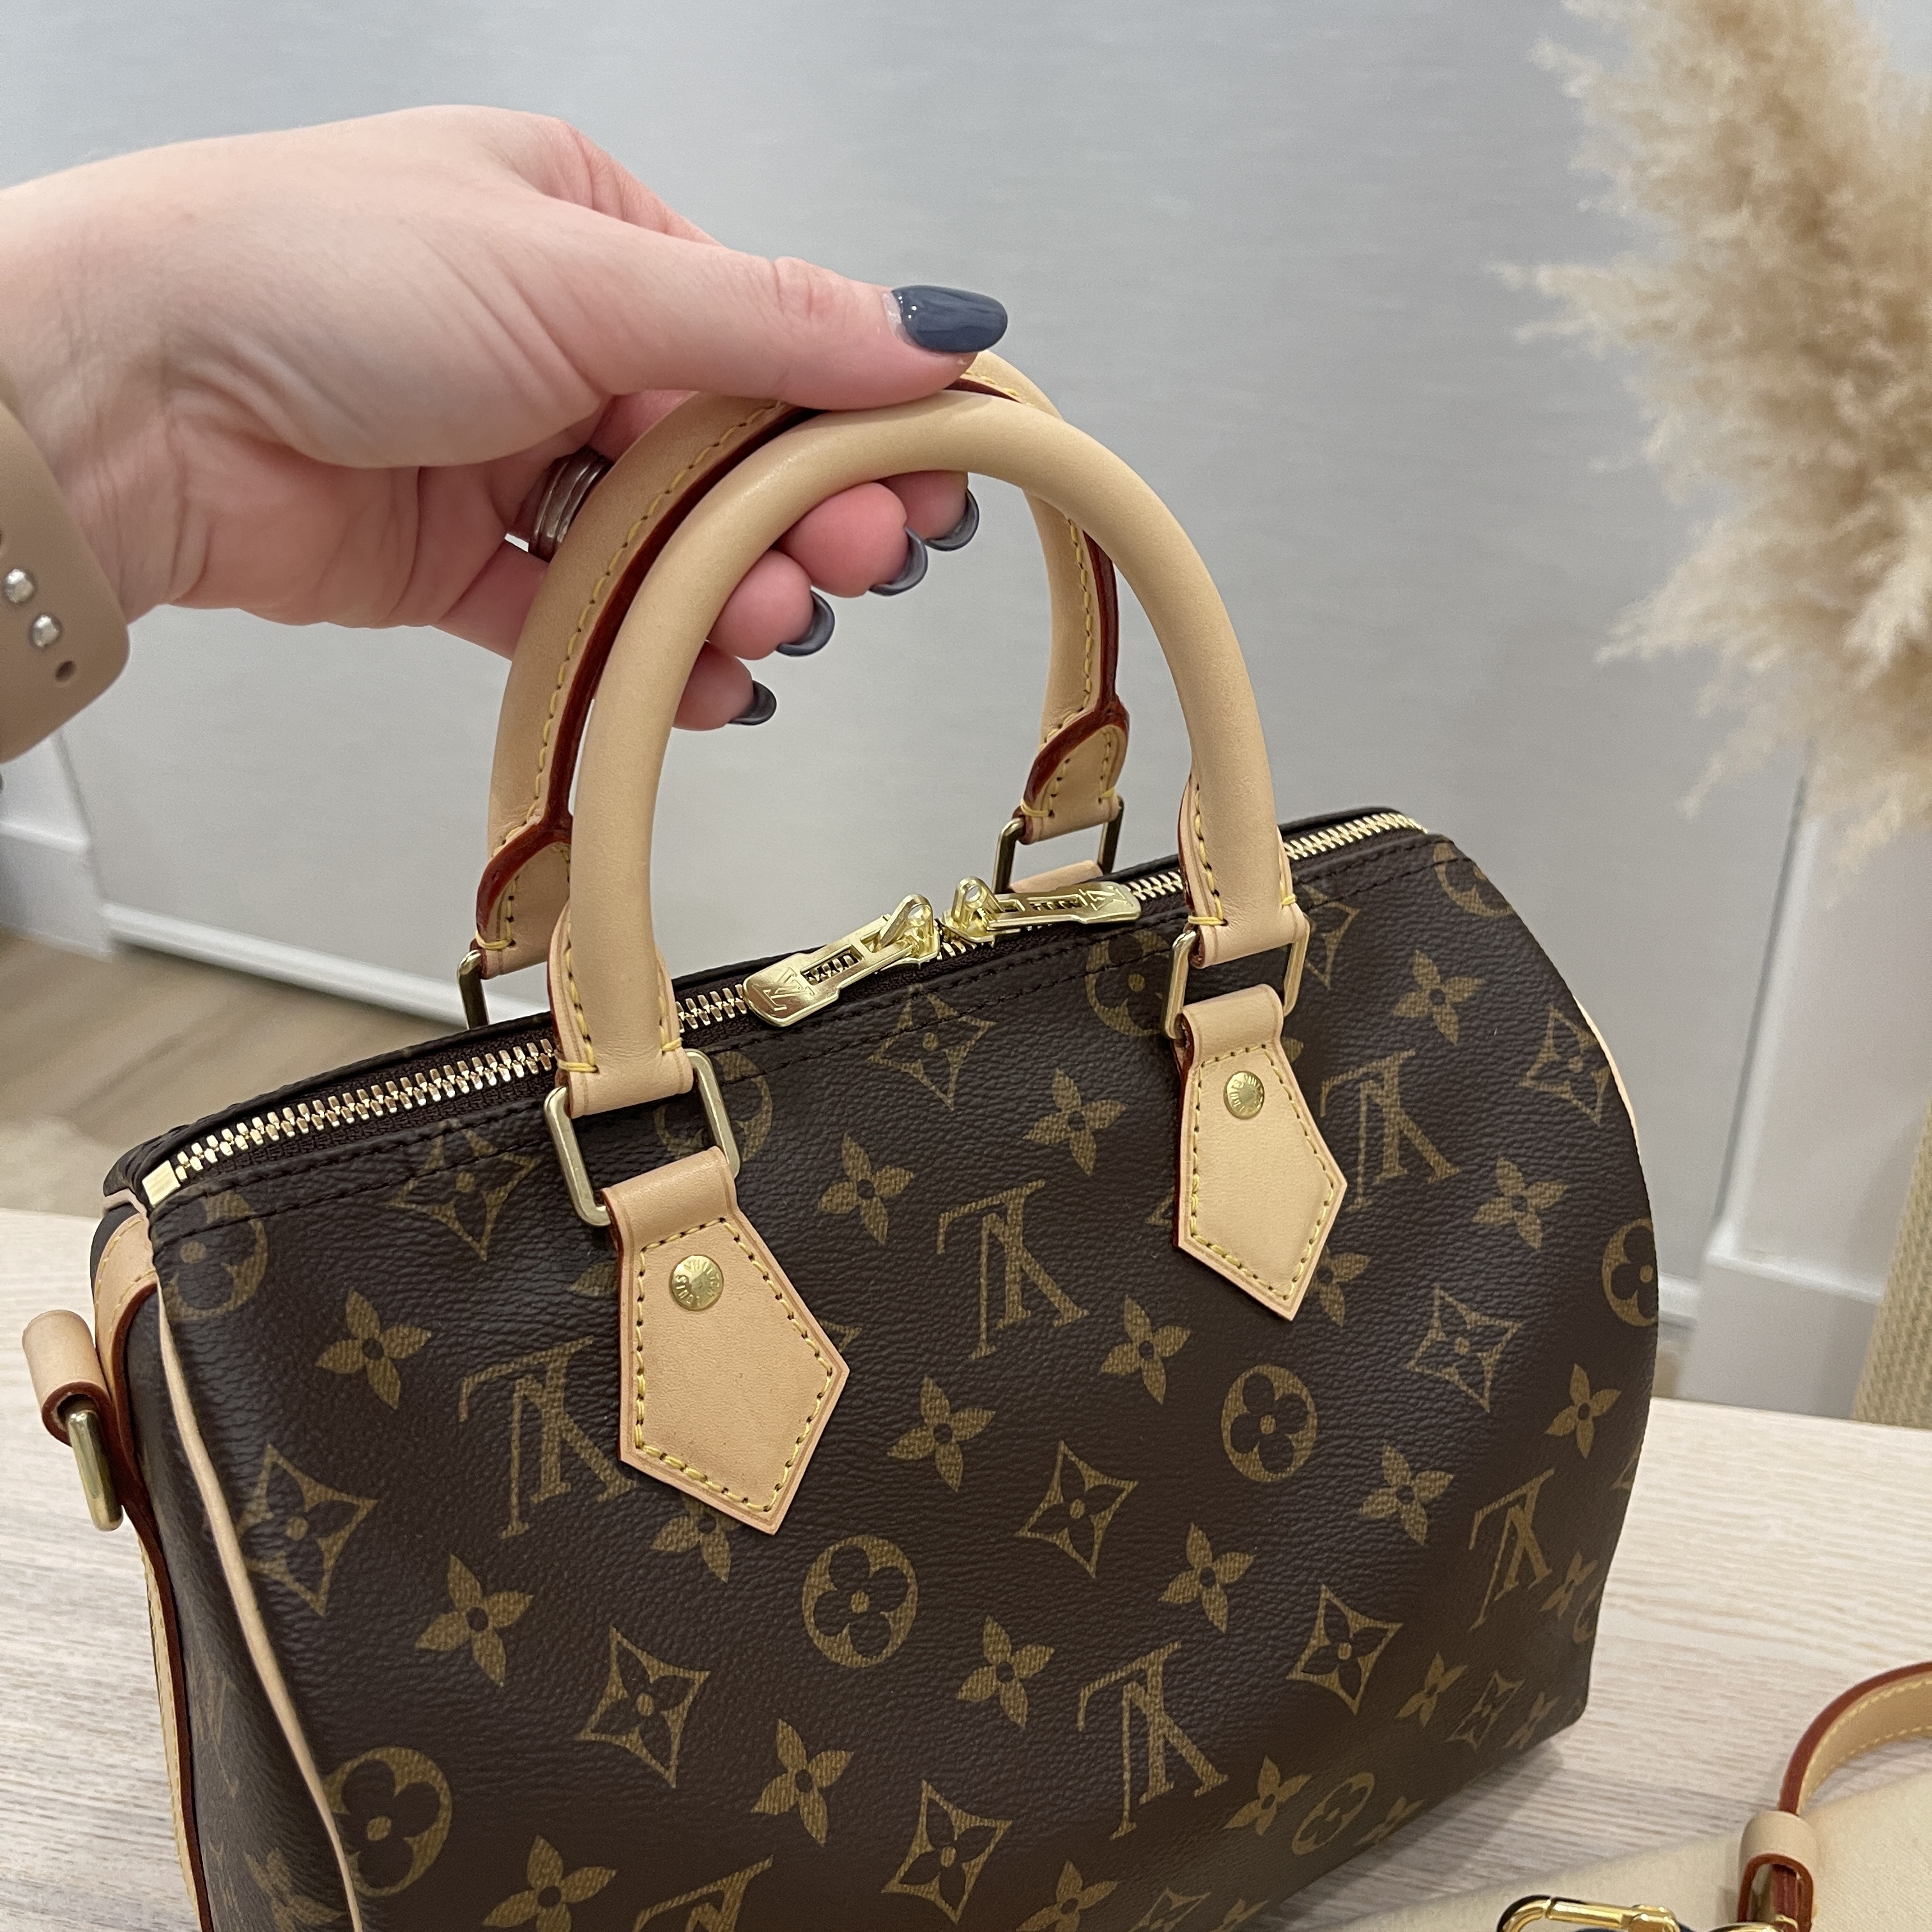 Some day Louis Vuitton Speedy 25 Bandouliere.  .com/eng-us/products/speedy-bandouliere-25-monogram-008…